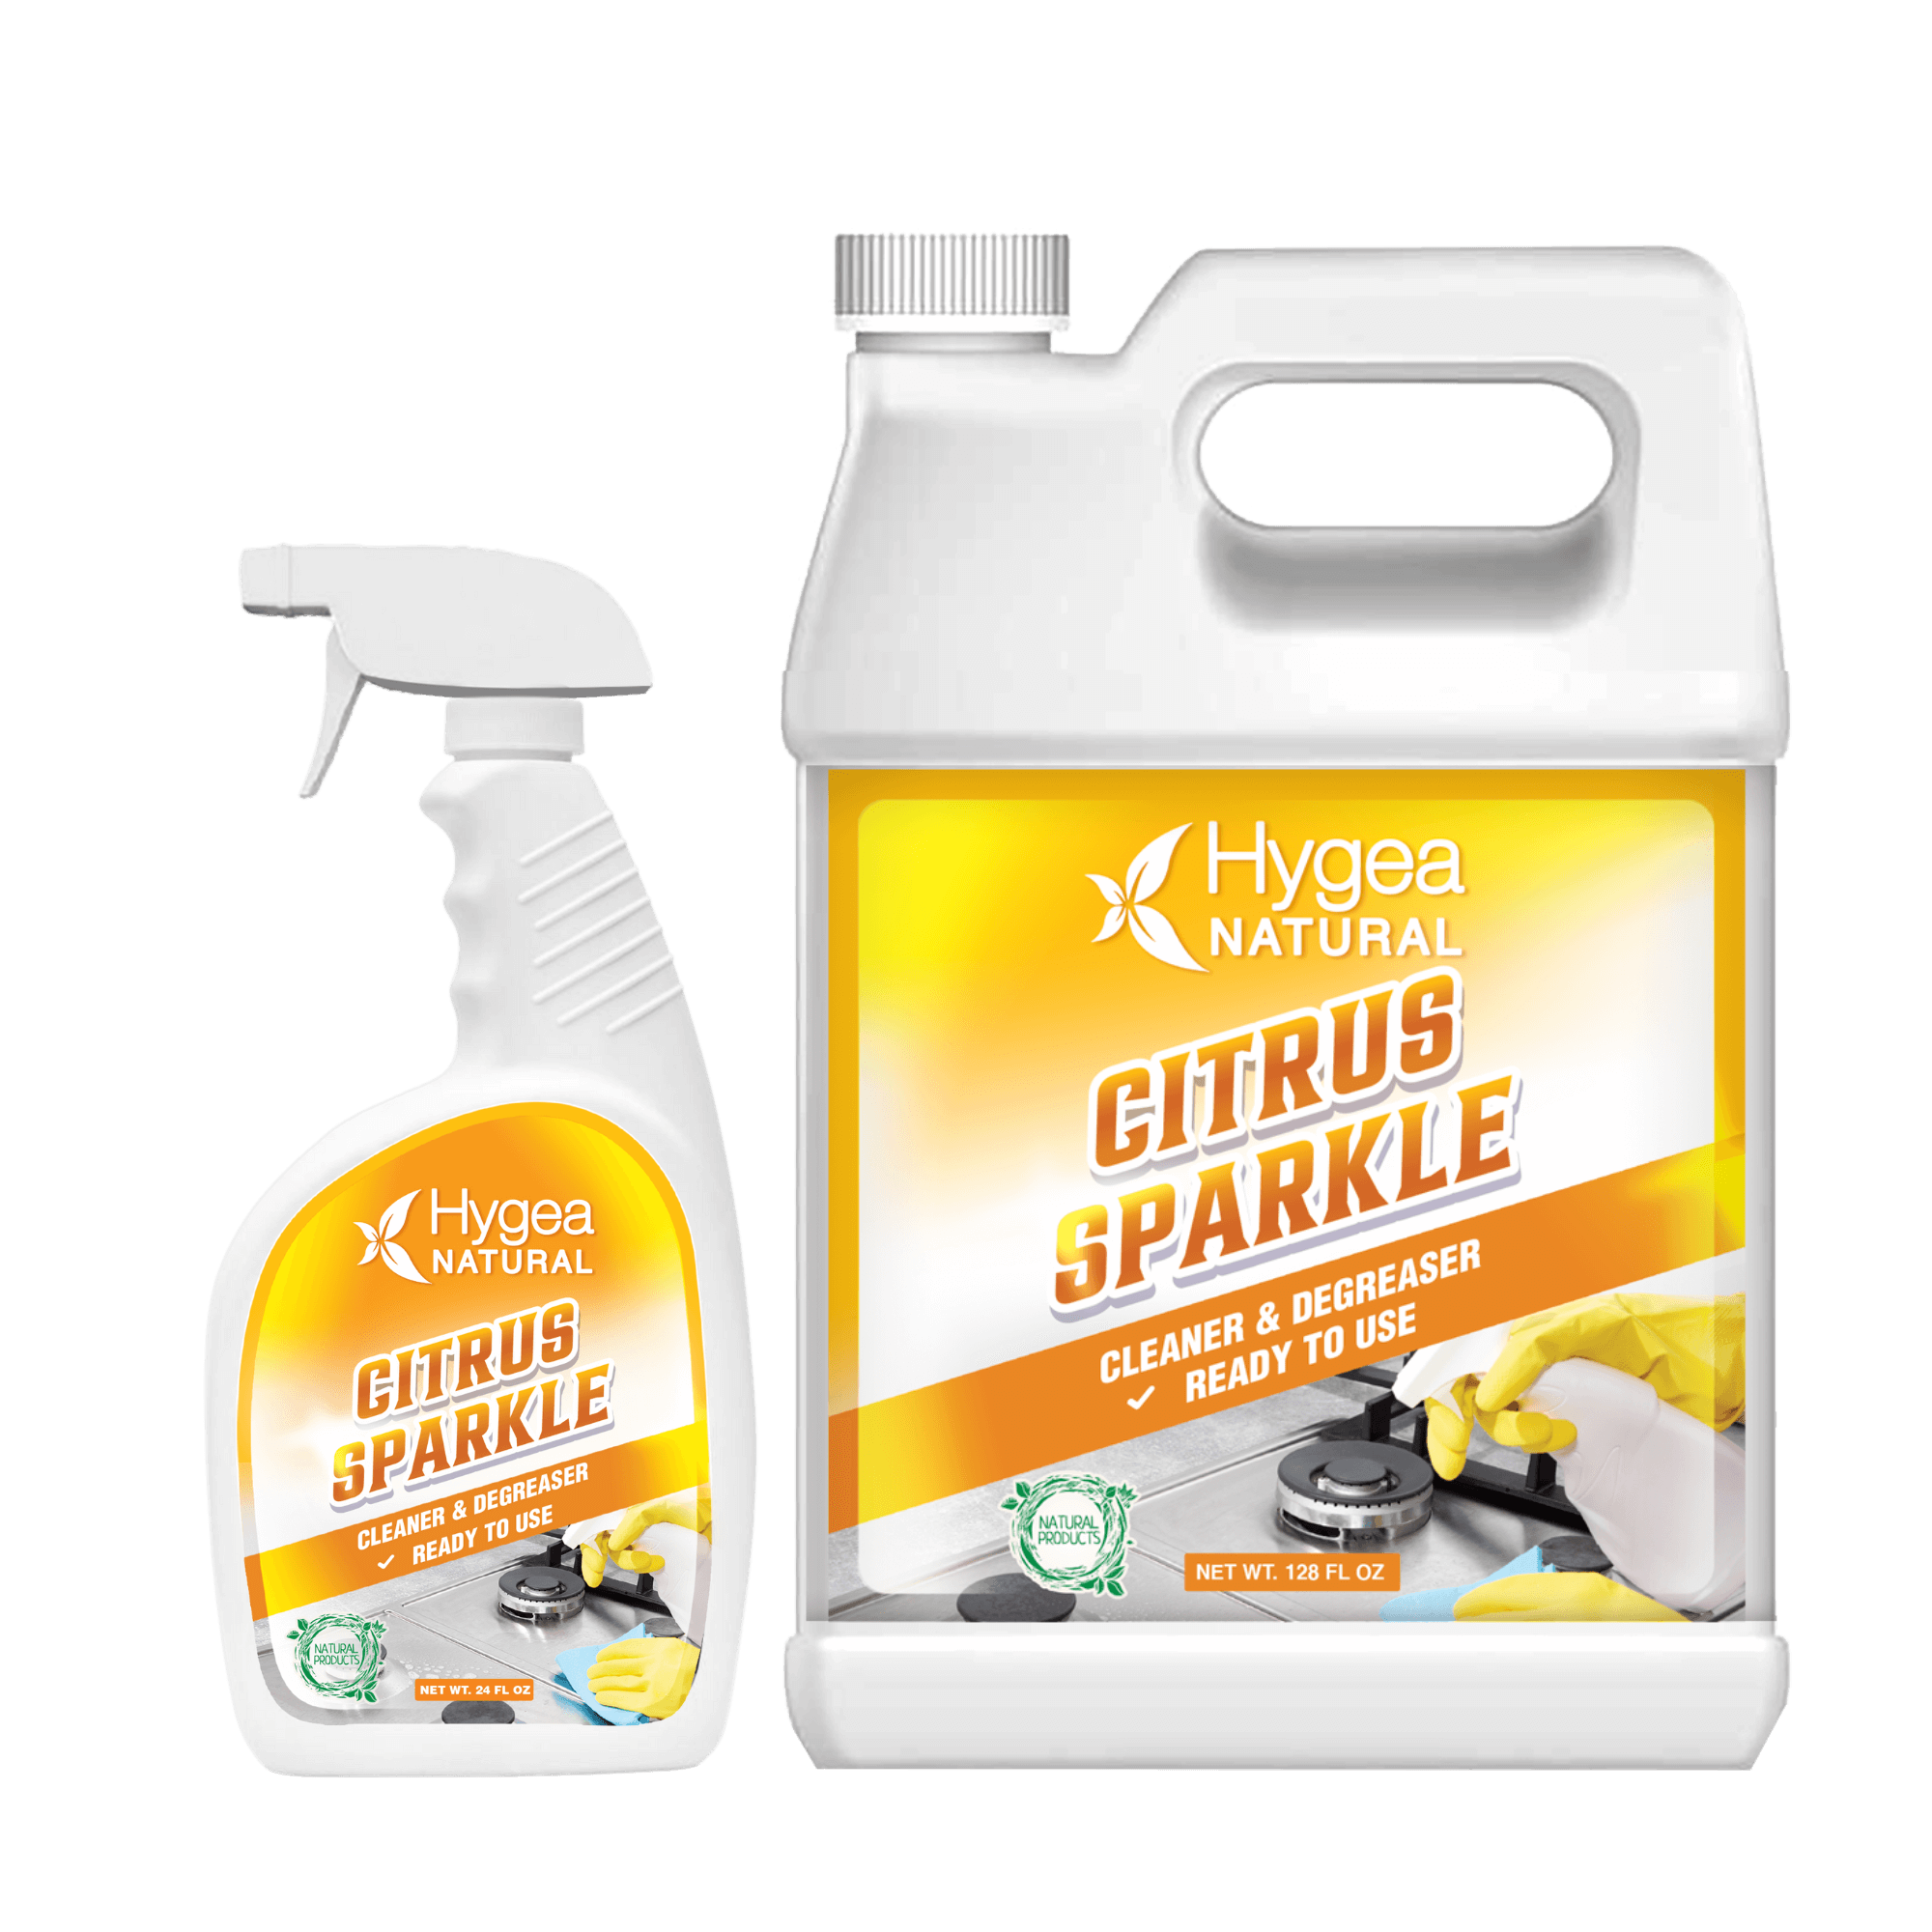 Hygea Natural Citrus Sparkle Cleaner & Degreaser 128 OZ Ready To Use